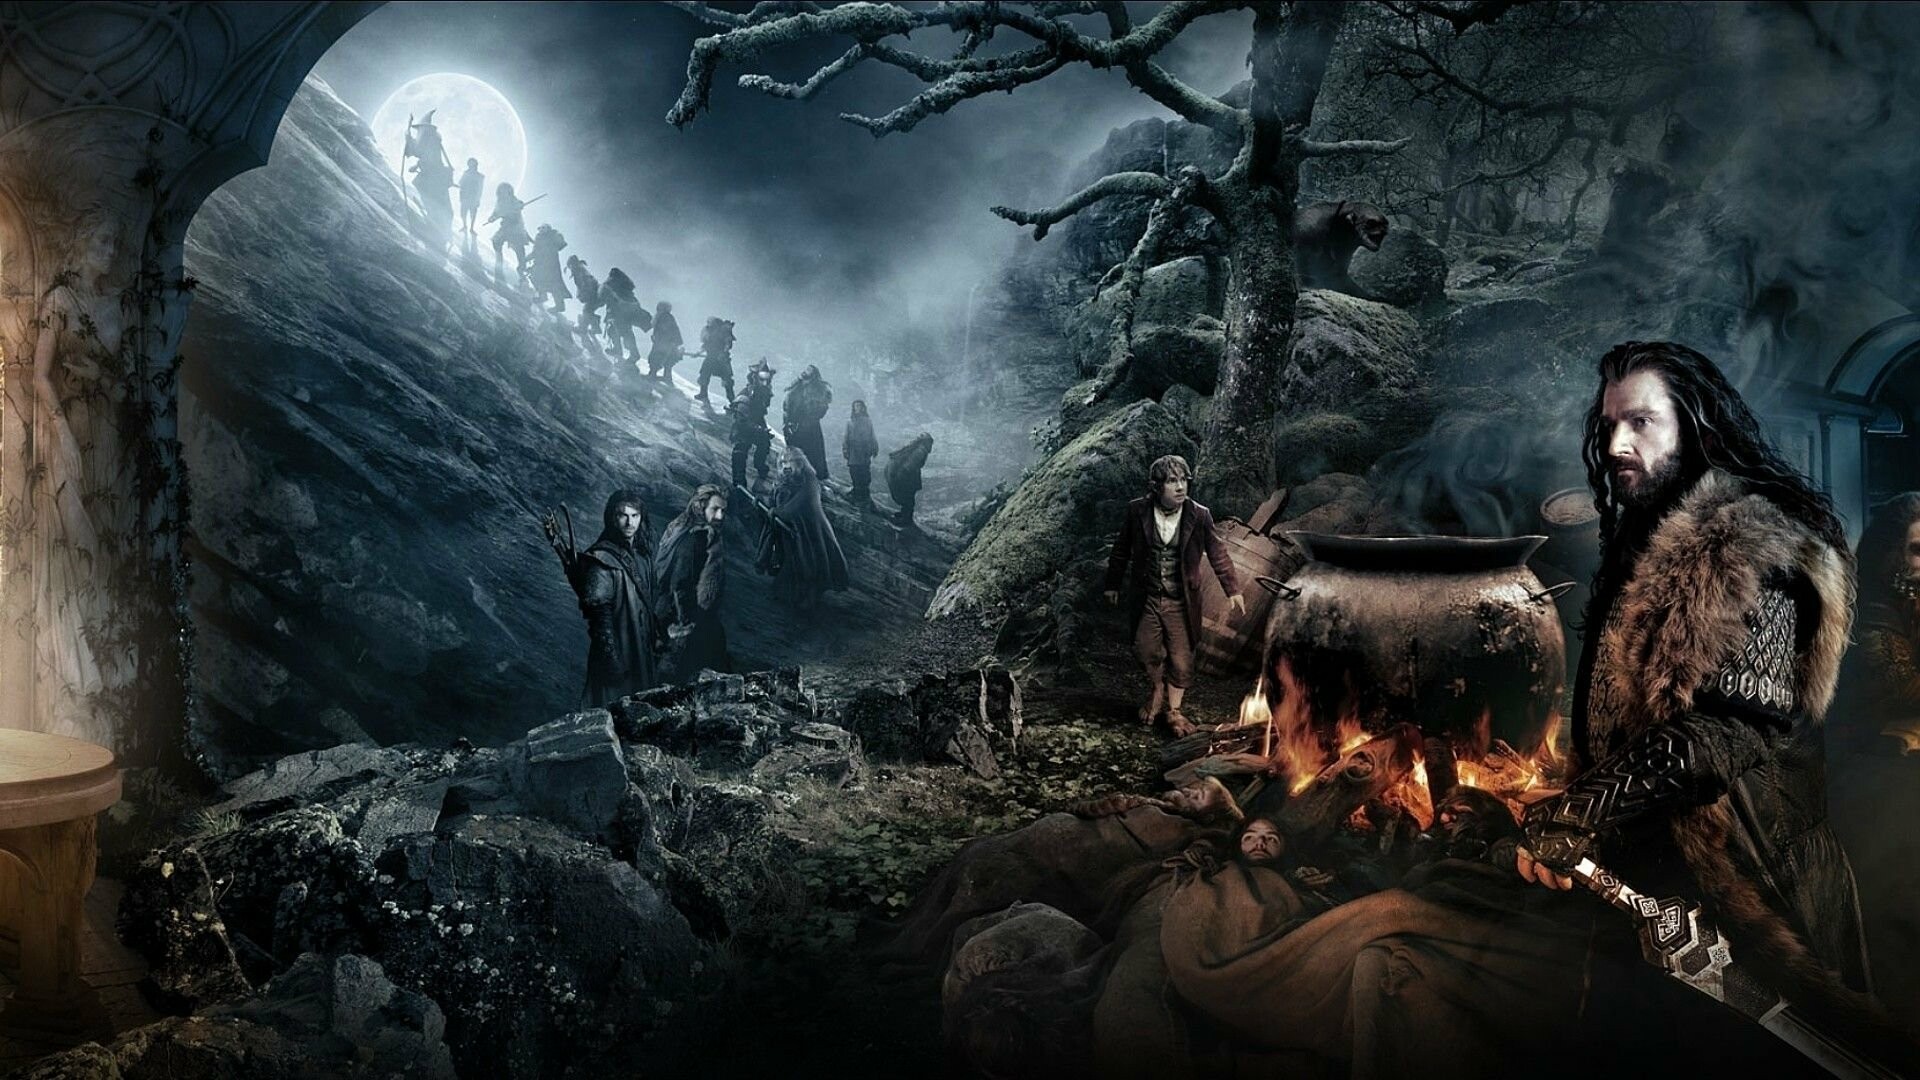 The Lord of the Rings: Epic fantasy adventure, Thorin Oakenshield. 1920x1080 Full HD Wallpaper.